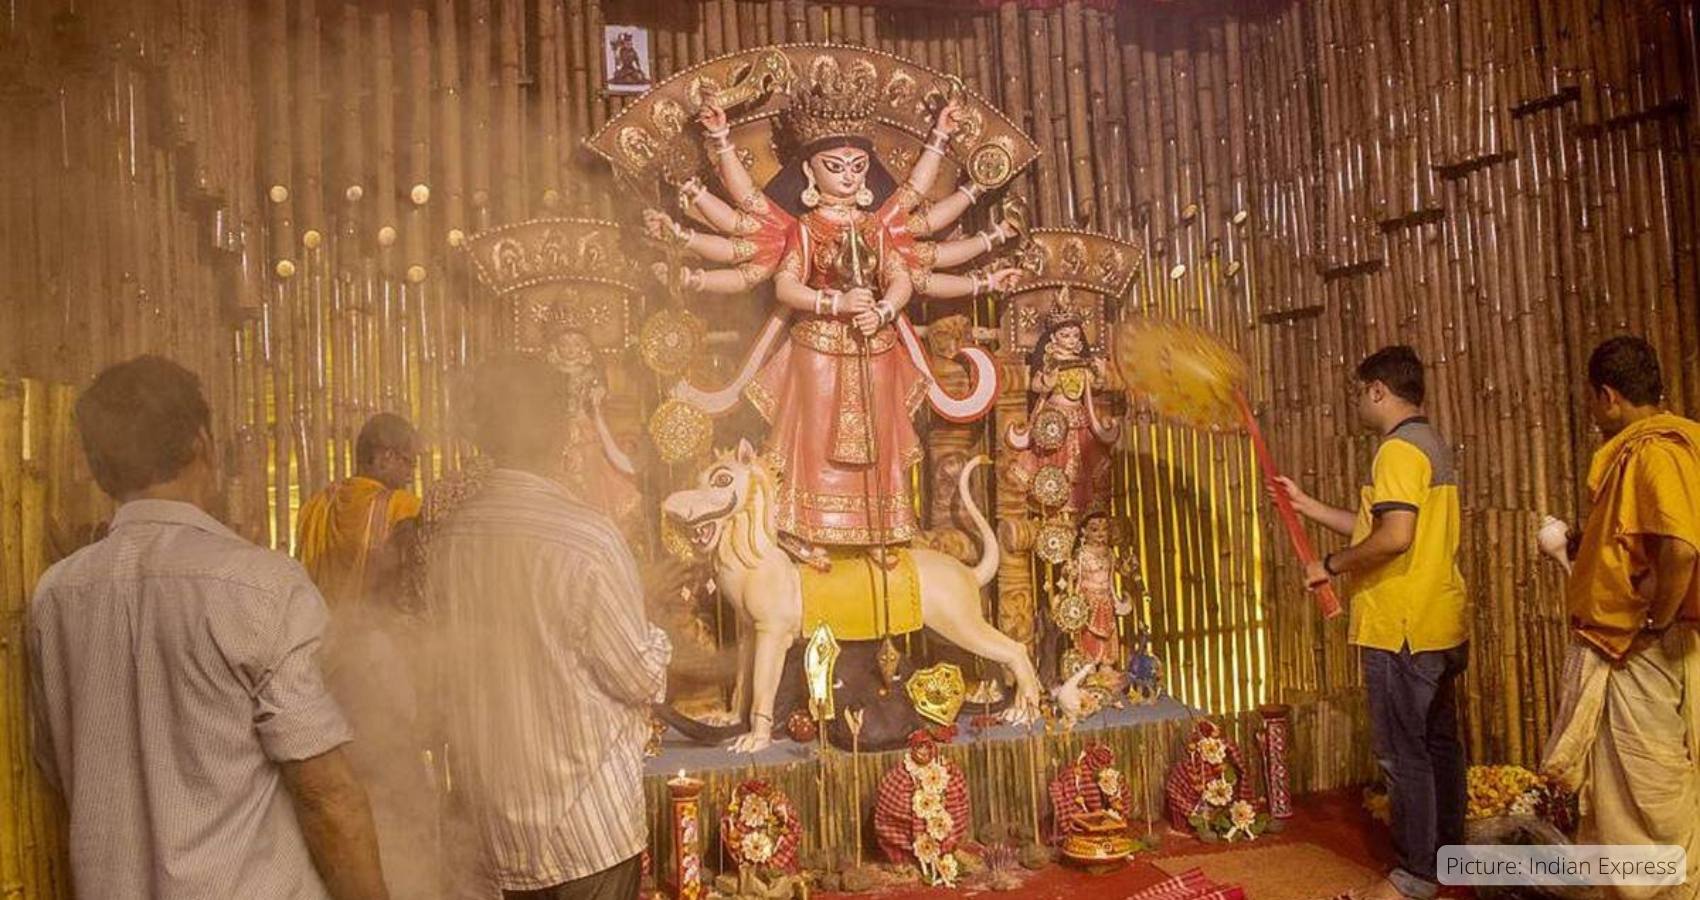 Durga Puja Inscribed By UNESCO As An Intangible Cultural Heritage Of Humanity